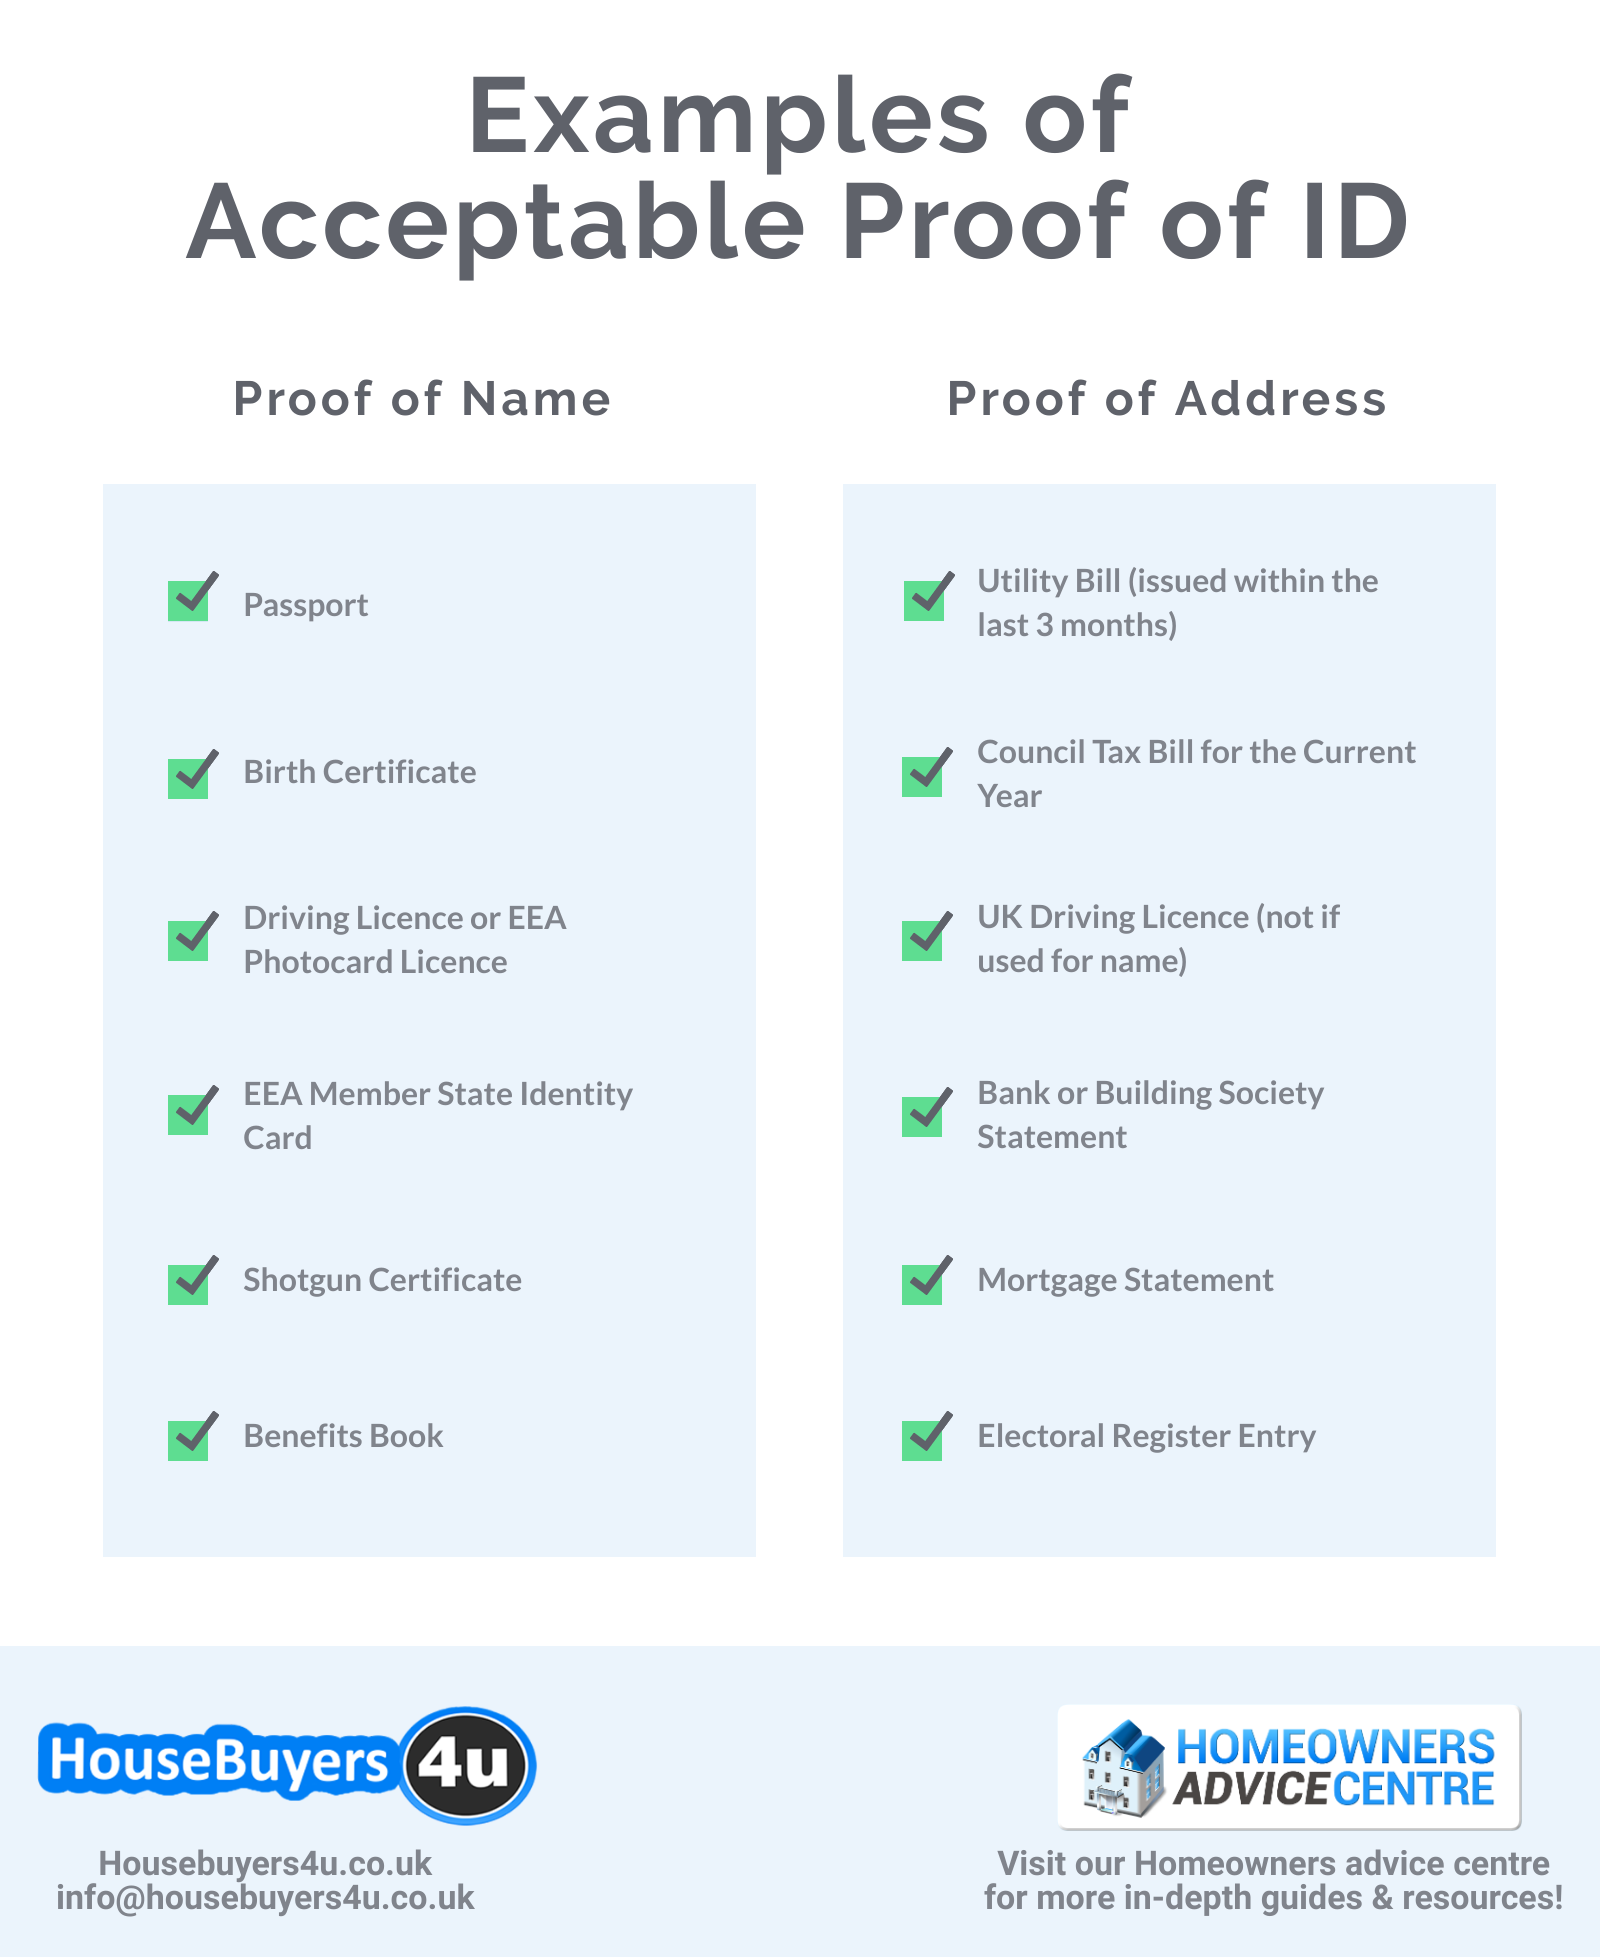 Acceptable proofs of ID that are needed when selling or buying a house